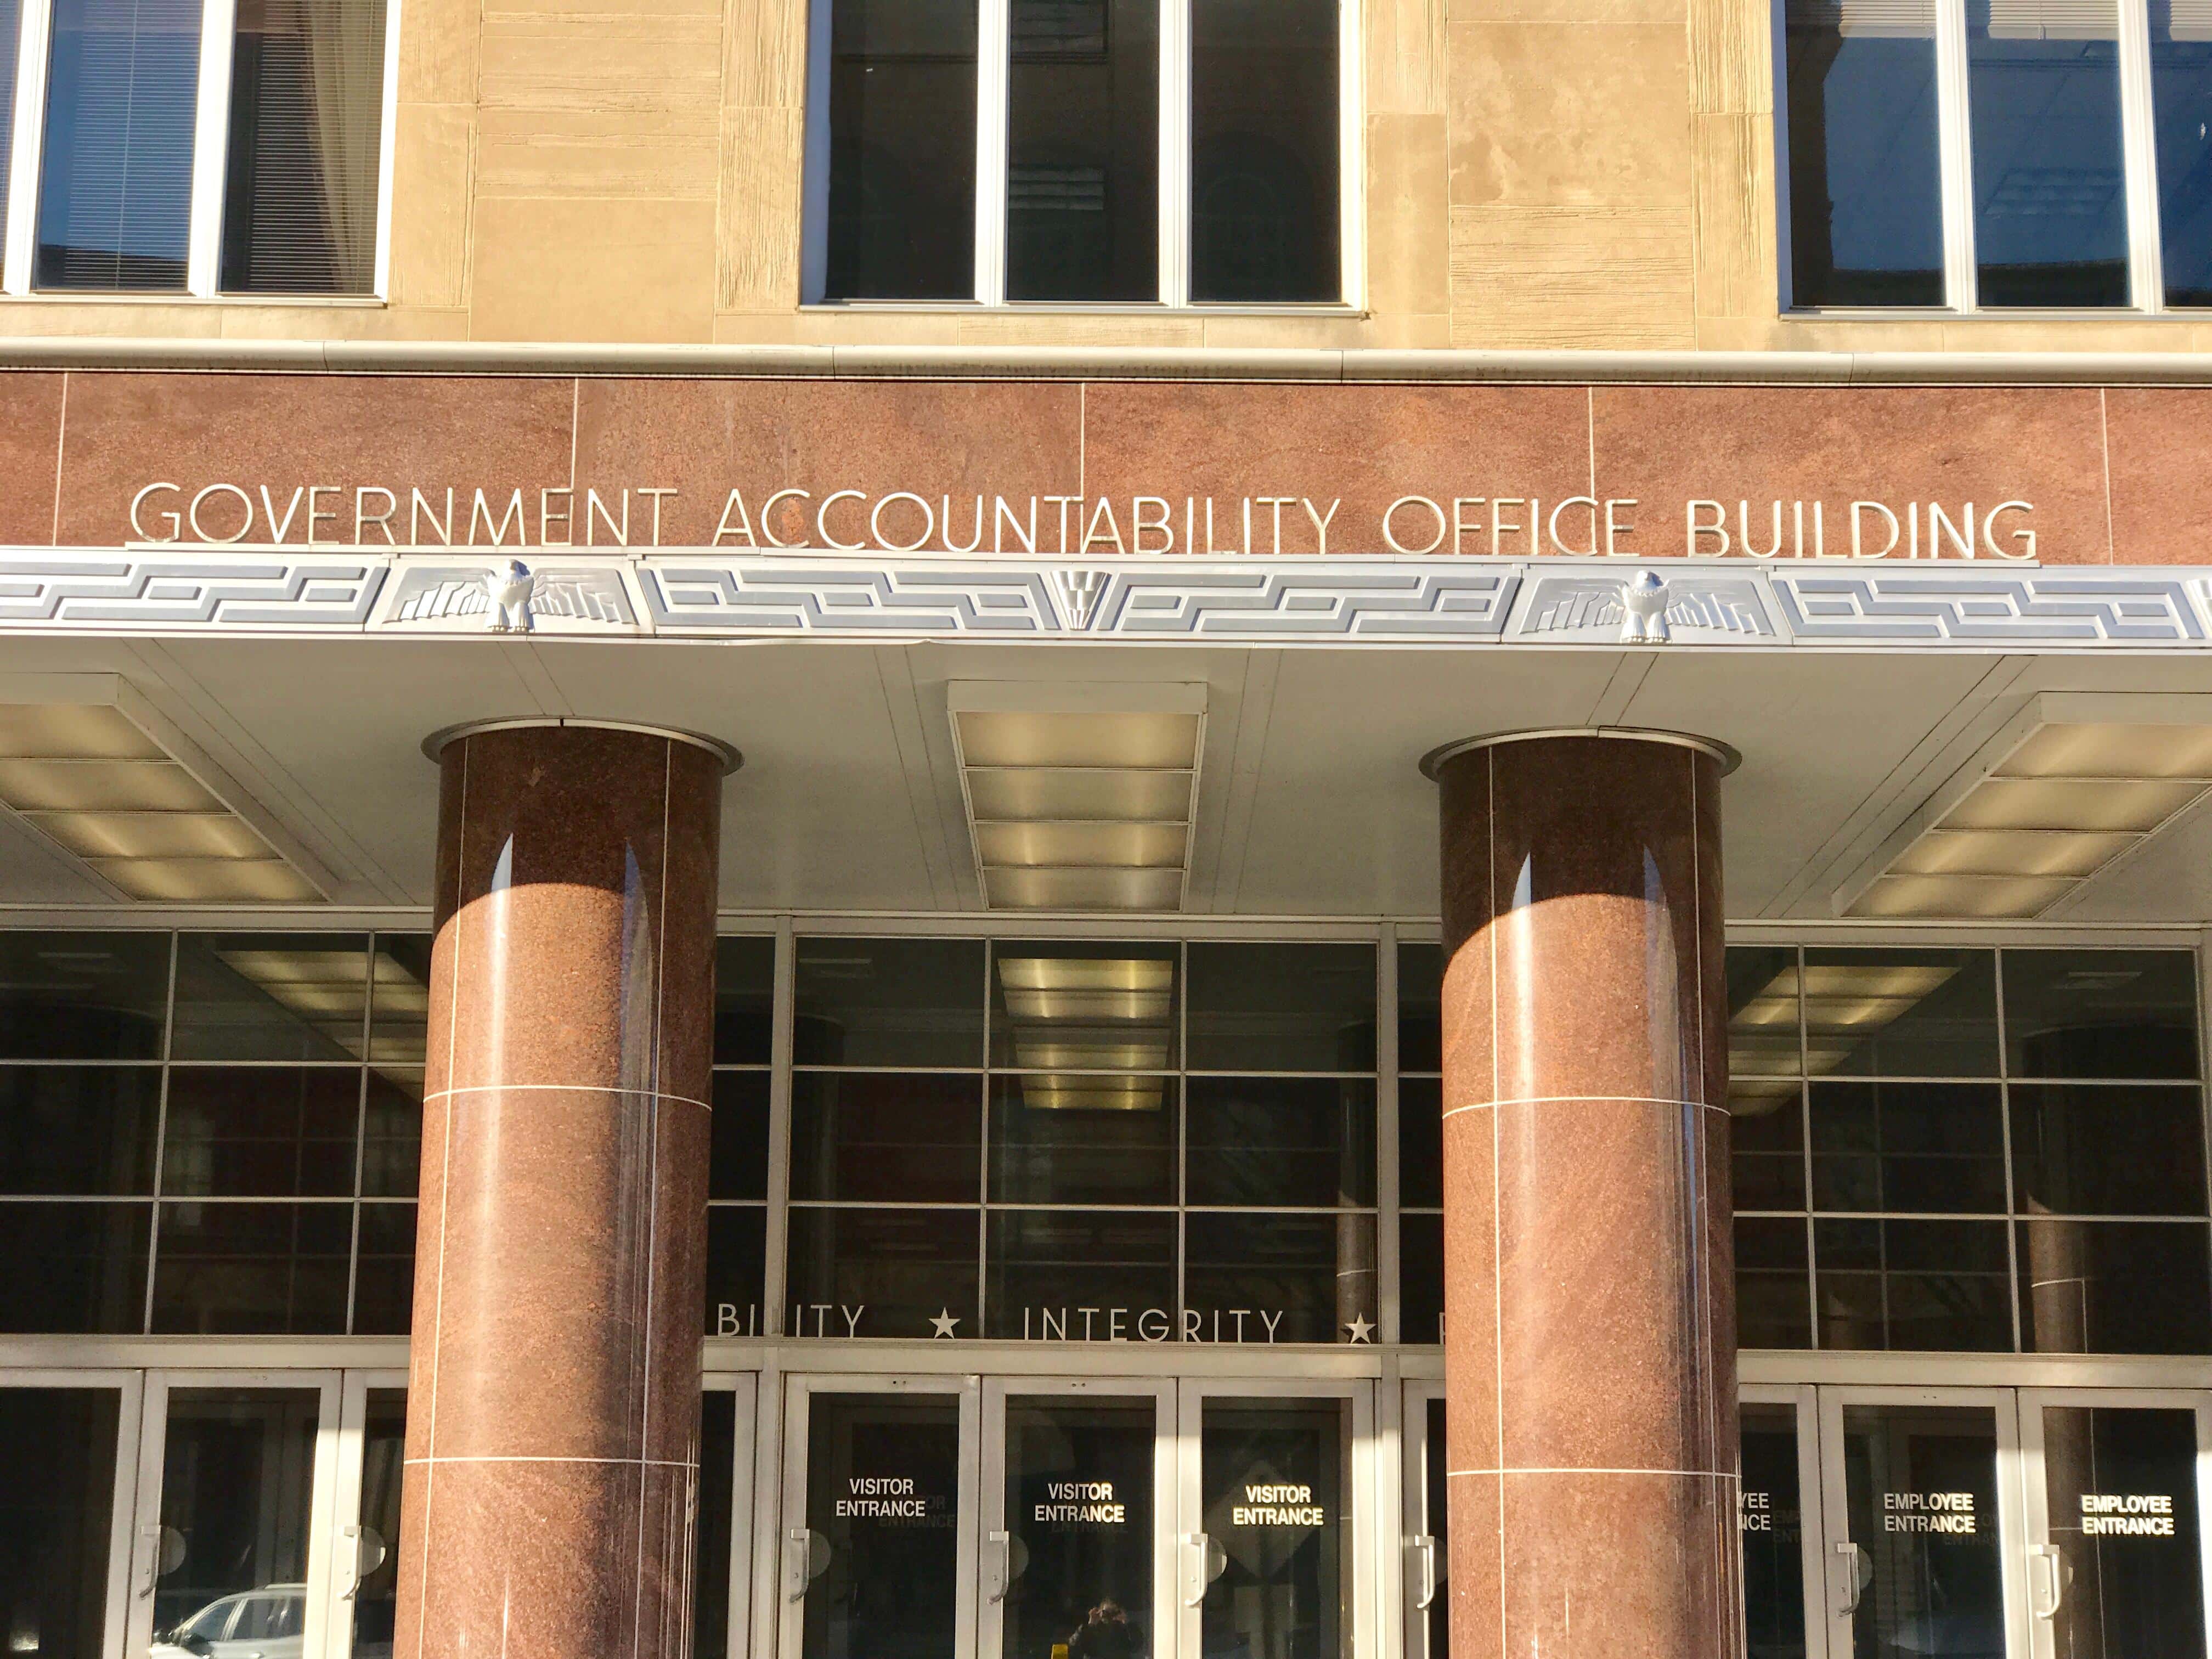 WASHINGTON, DC - FEBRUARY 9, 2019: GOVERNMENT ACCOUNTABILITY OFFICE BUILDING - sign at main headquarters entrance.